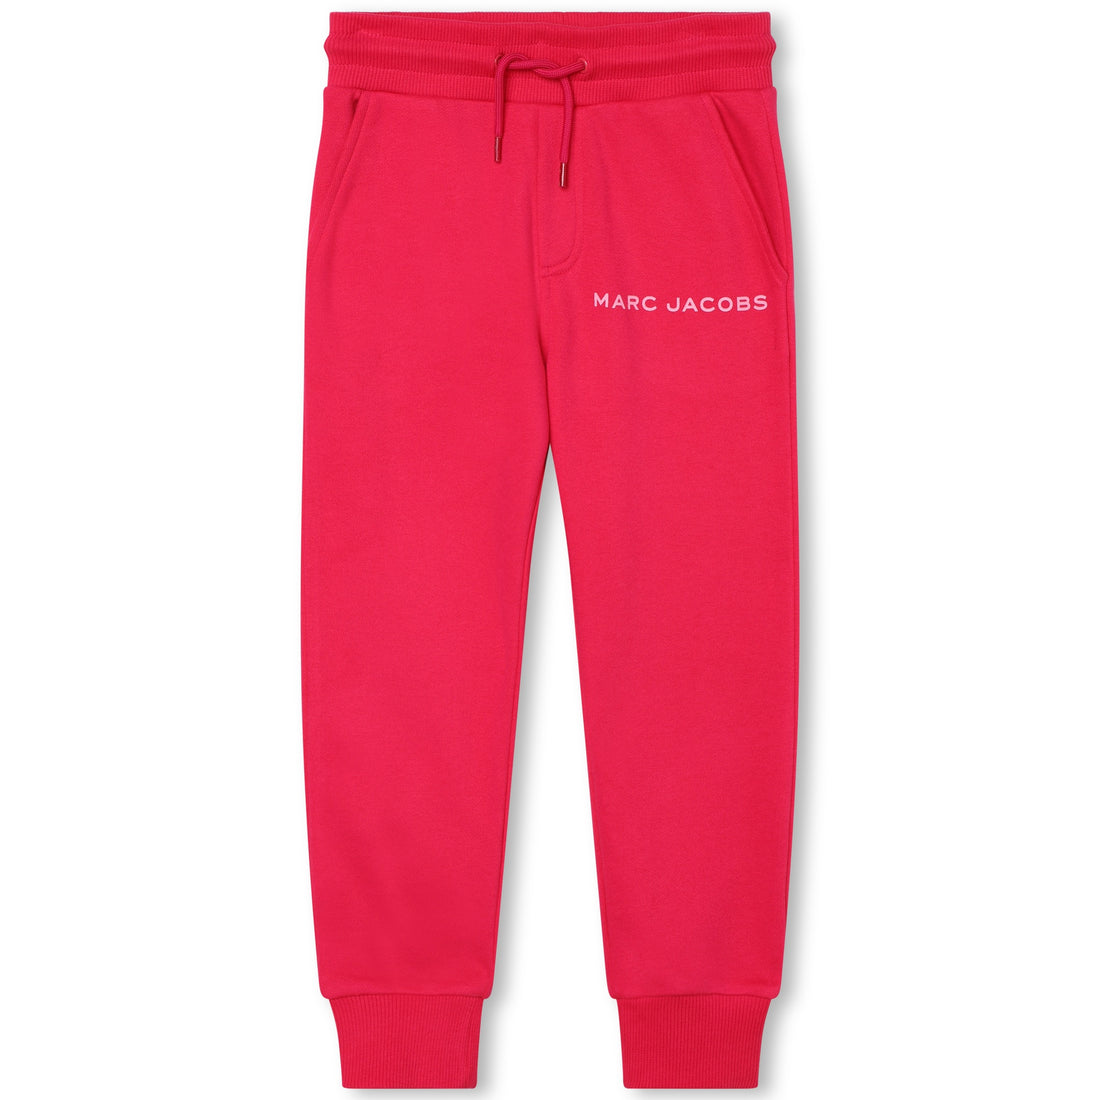 The Marc Jacobs Jogging Bottoms Style: W54006